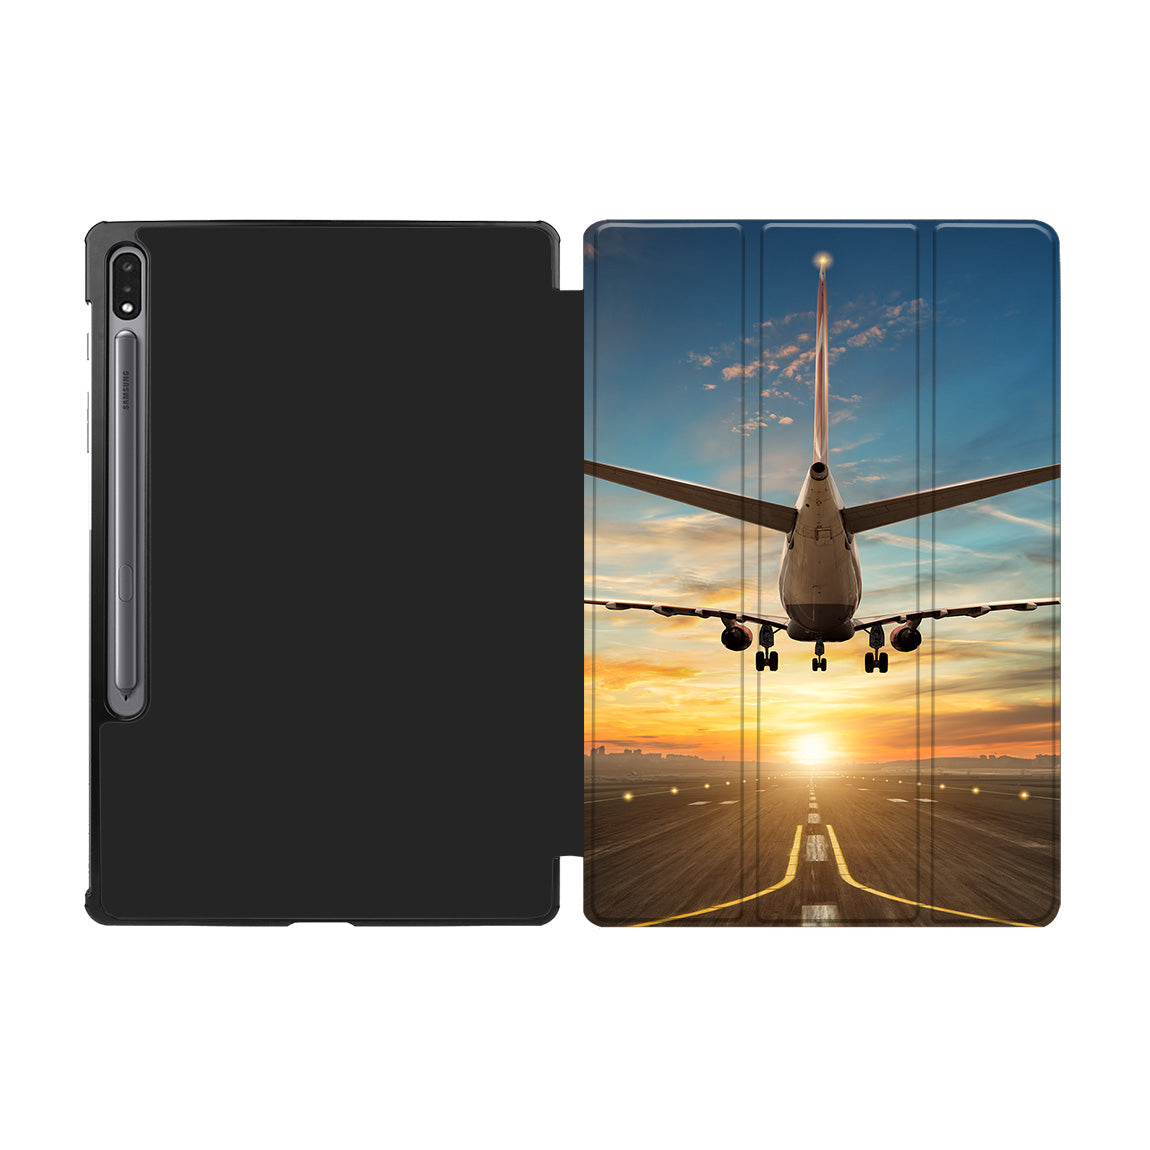 Airplane over Runway Towards the Sunrise Designed Samsung Tablet Cases